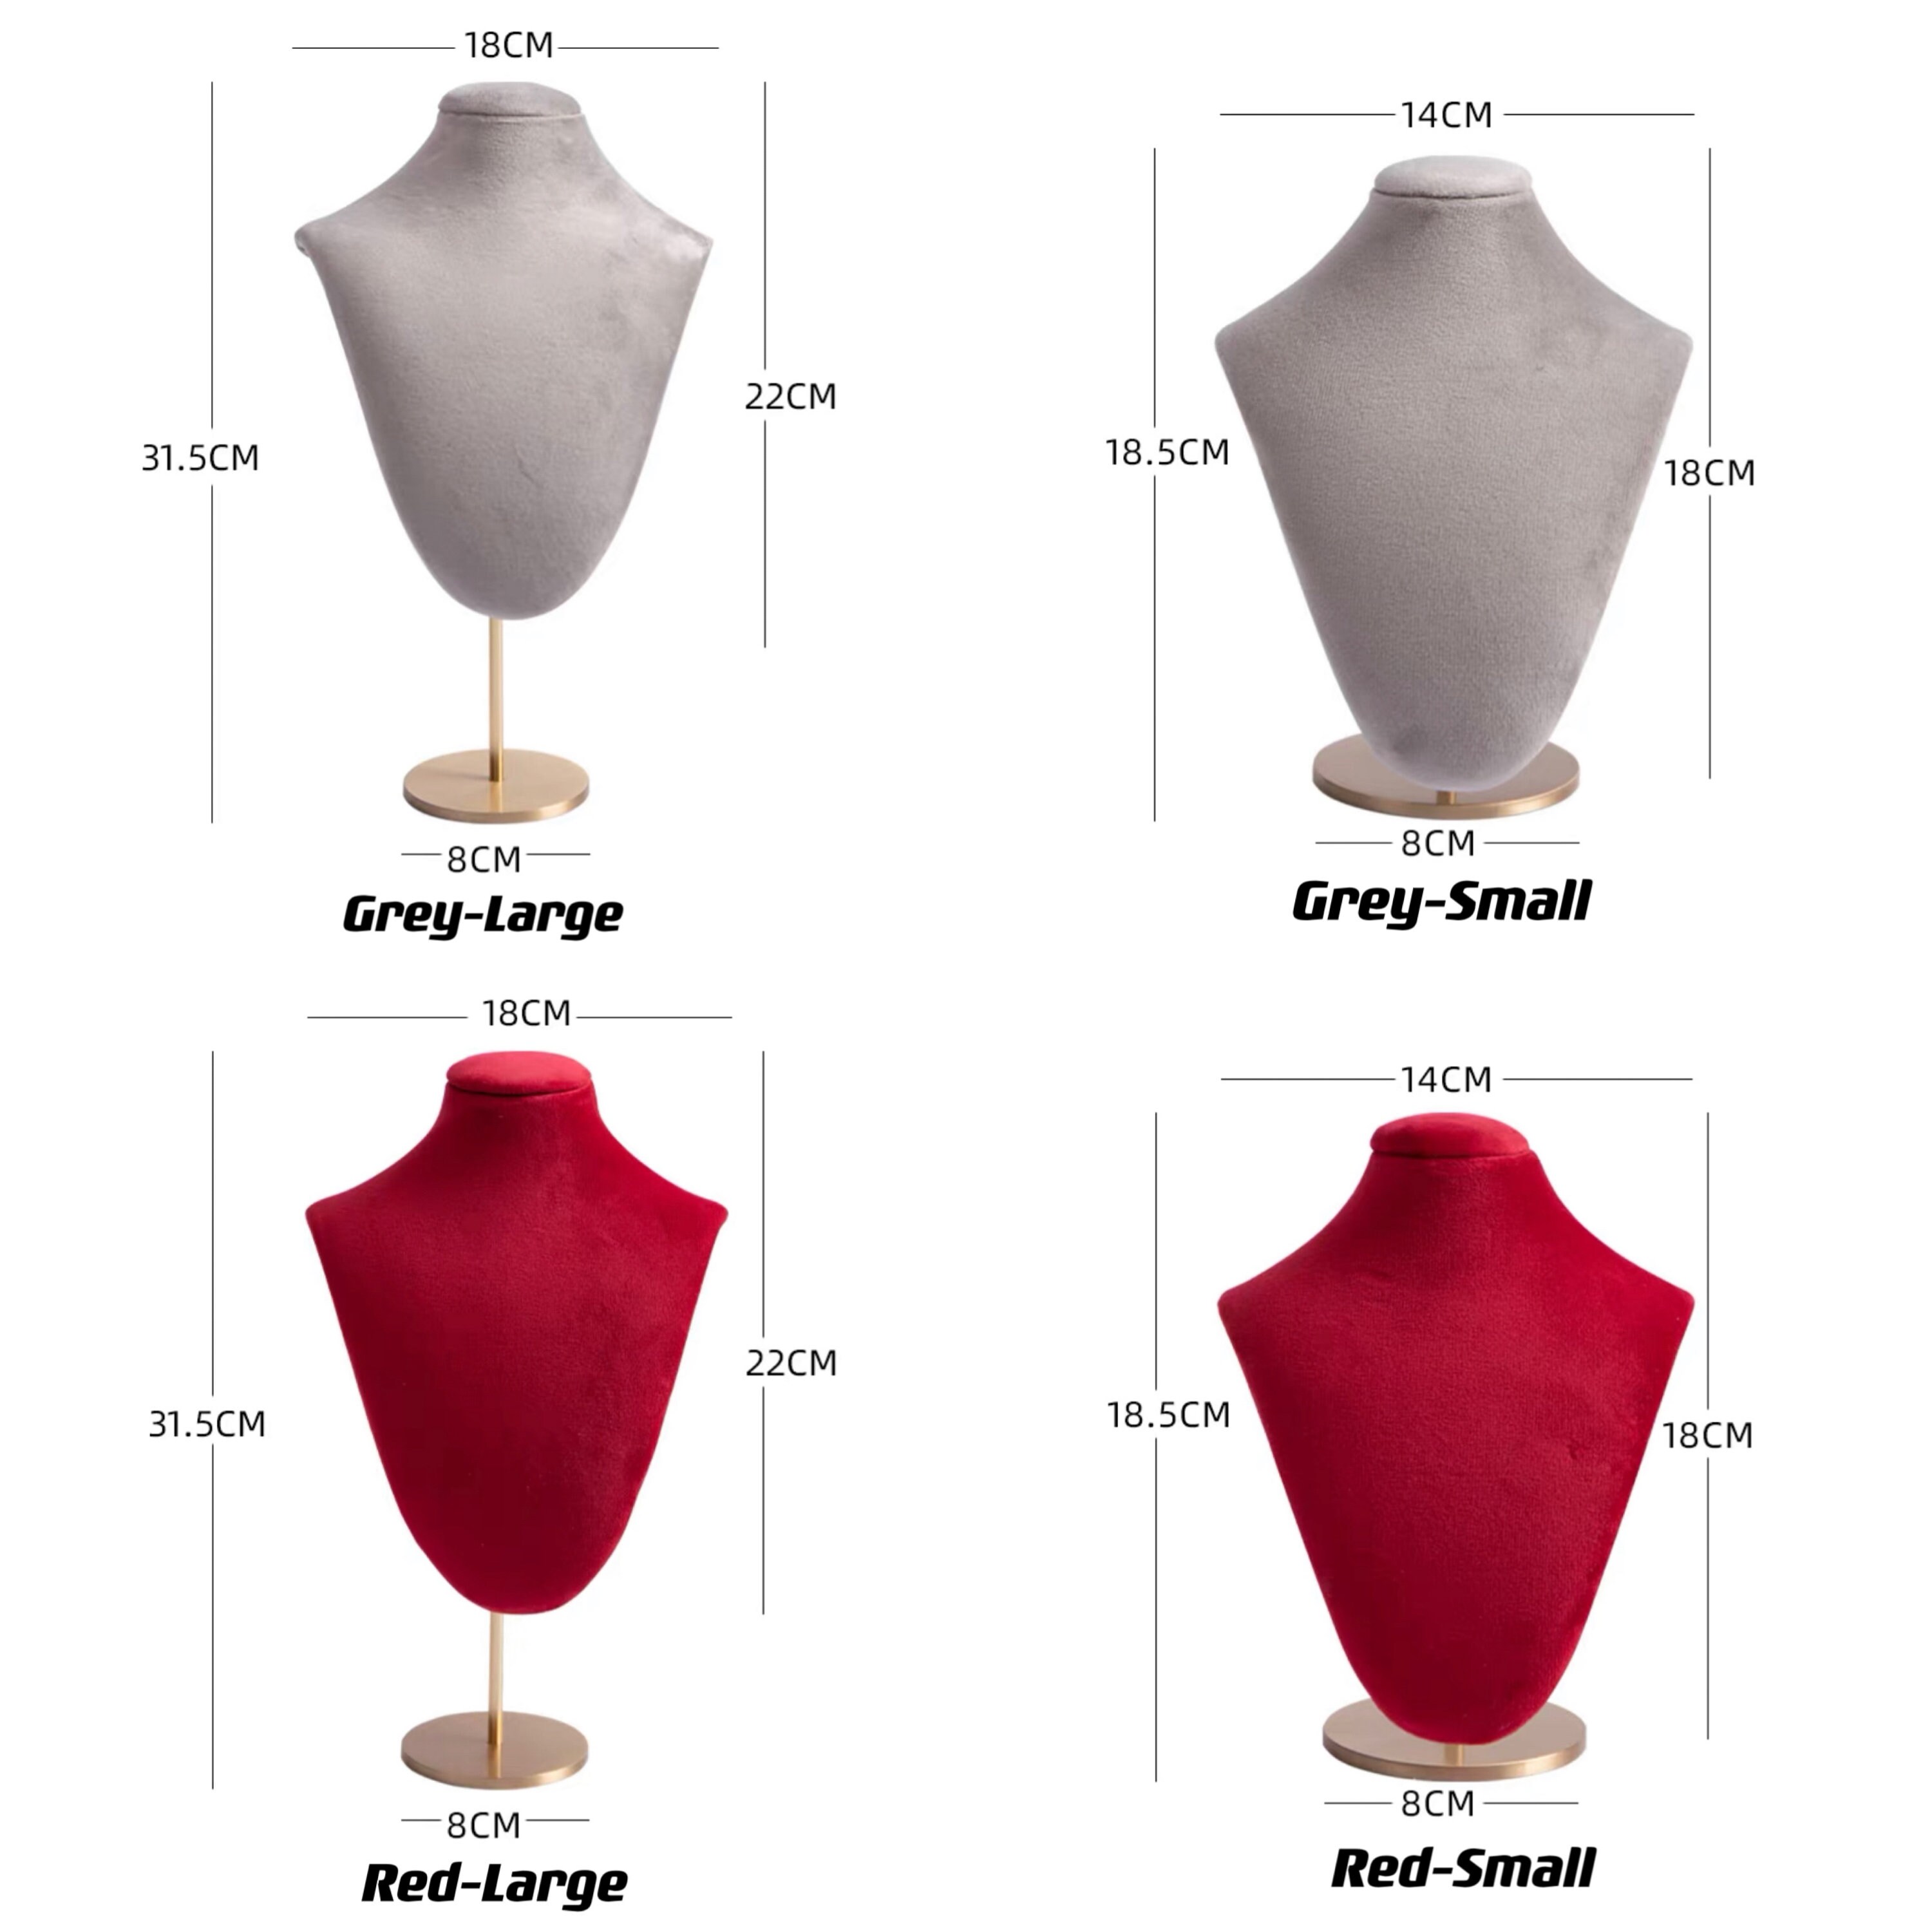 Velvet Red Necklace Display Stand Elegant Jewelry Display For Photoshoots,  Prop273o From Cftde, $15.97